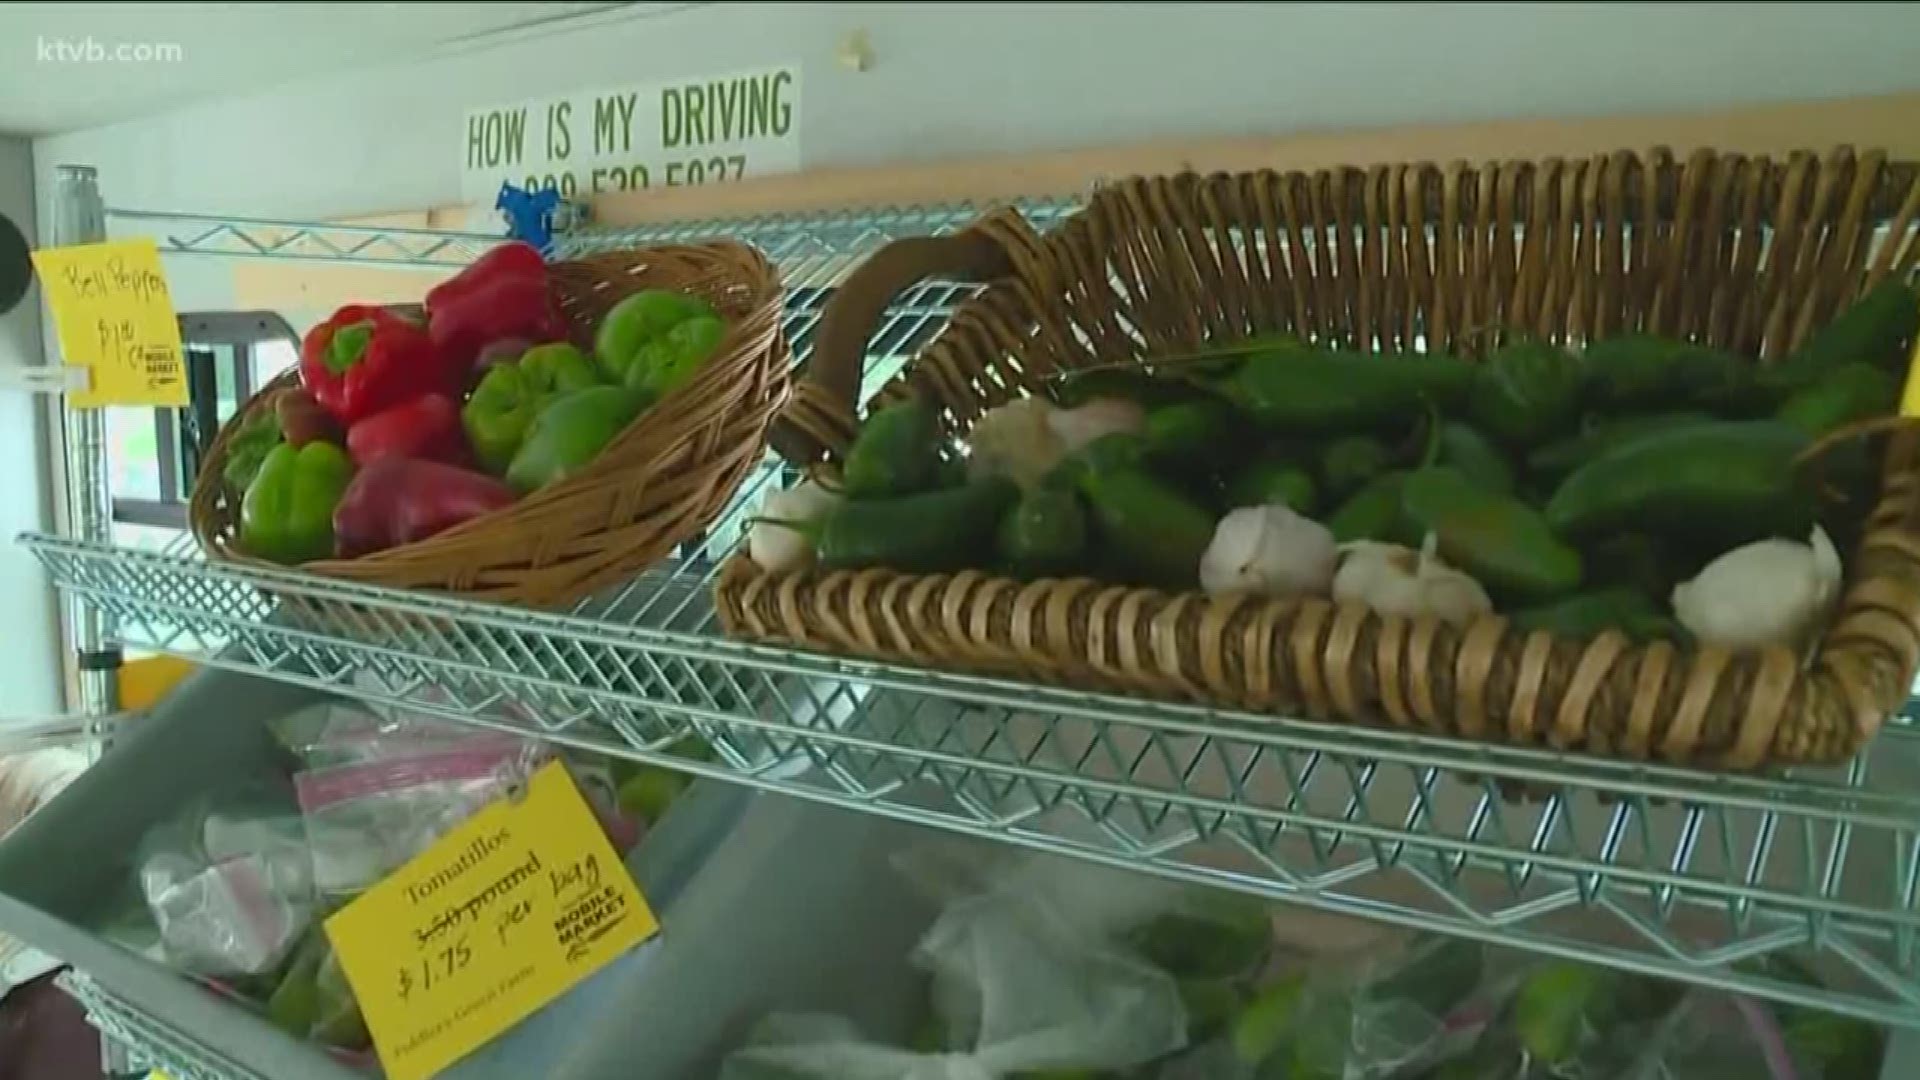 The market will bring fresh produce to 16 neighborhood locations around Boise.